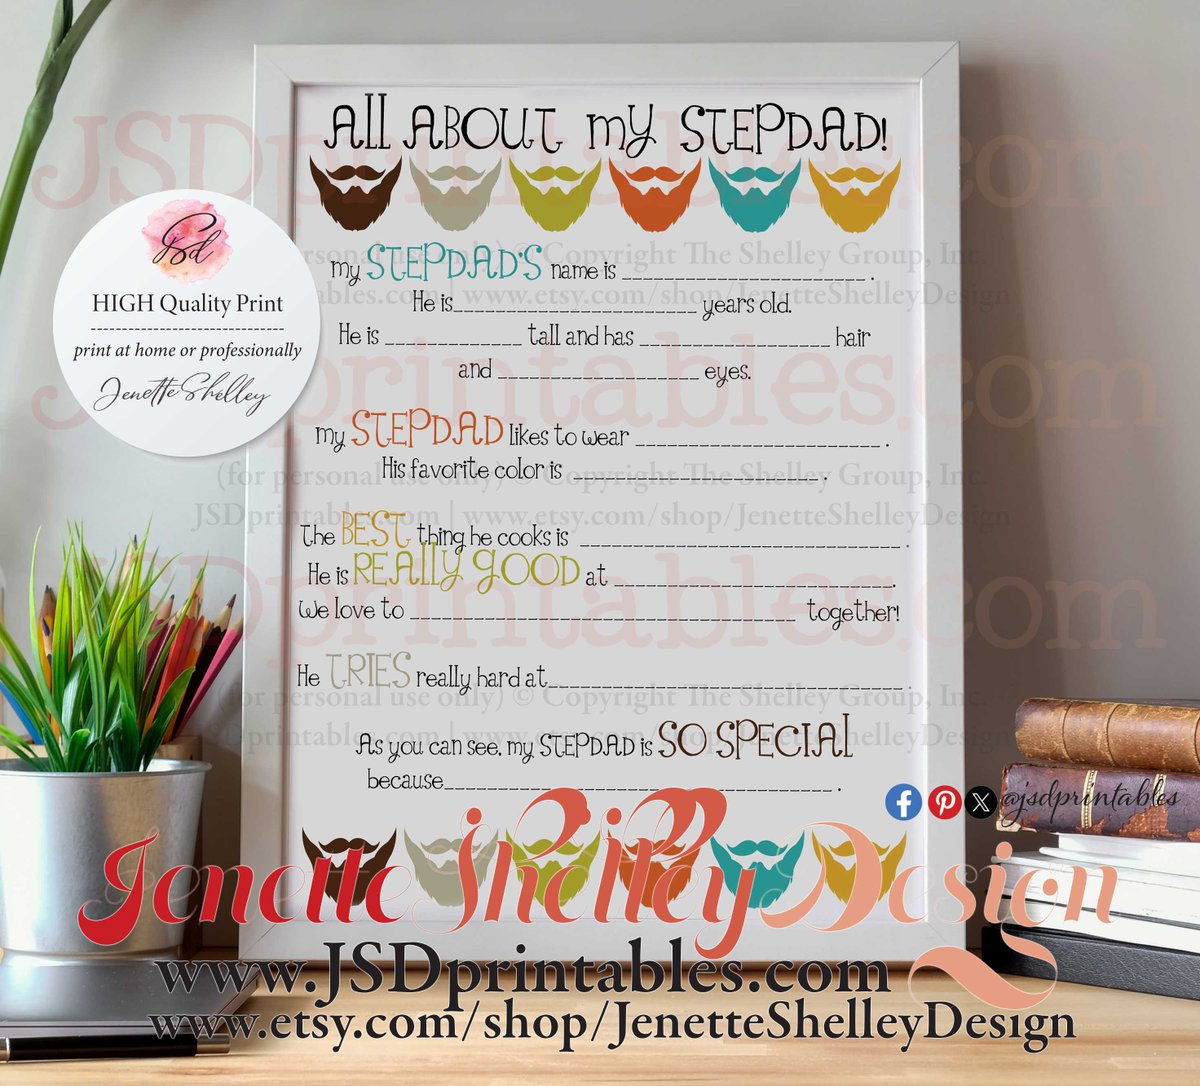 jsdprintables.com/shop/all-about… @jsdprintables #keepsakes #fathersday #stepdad #happyfathersday #fathersdaygiftideas #fathersdaygift #giftsforhim Simply print from home or the office, have the kids fill it out, and watch as dad's heart melts when he sees the thoughtful responses.